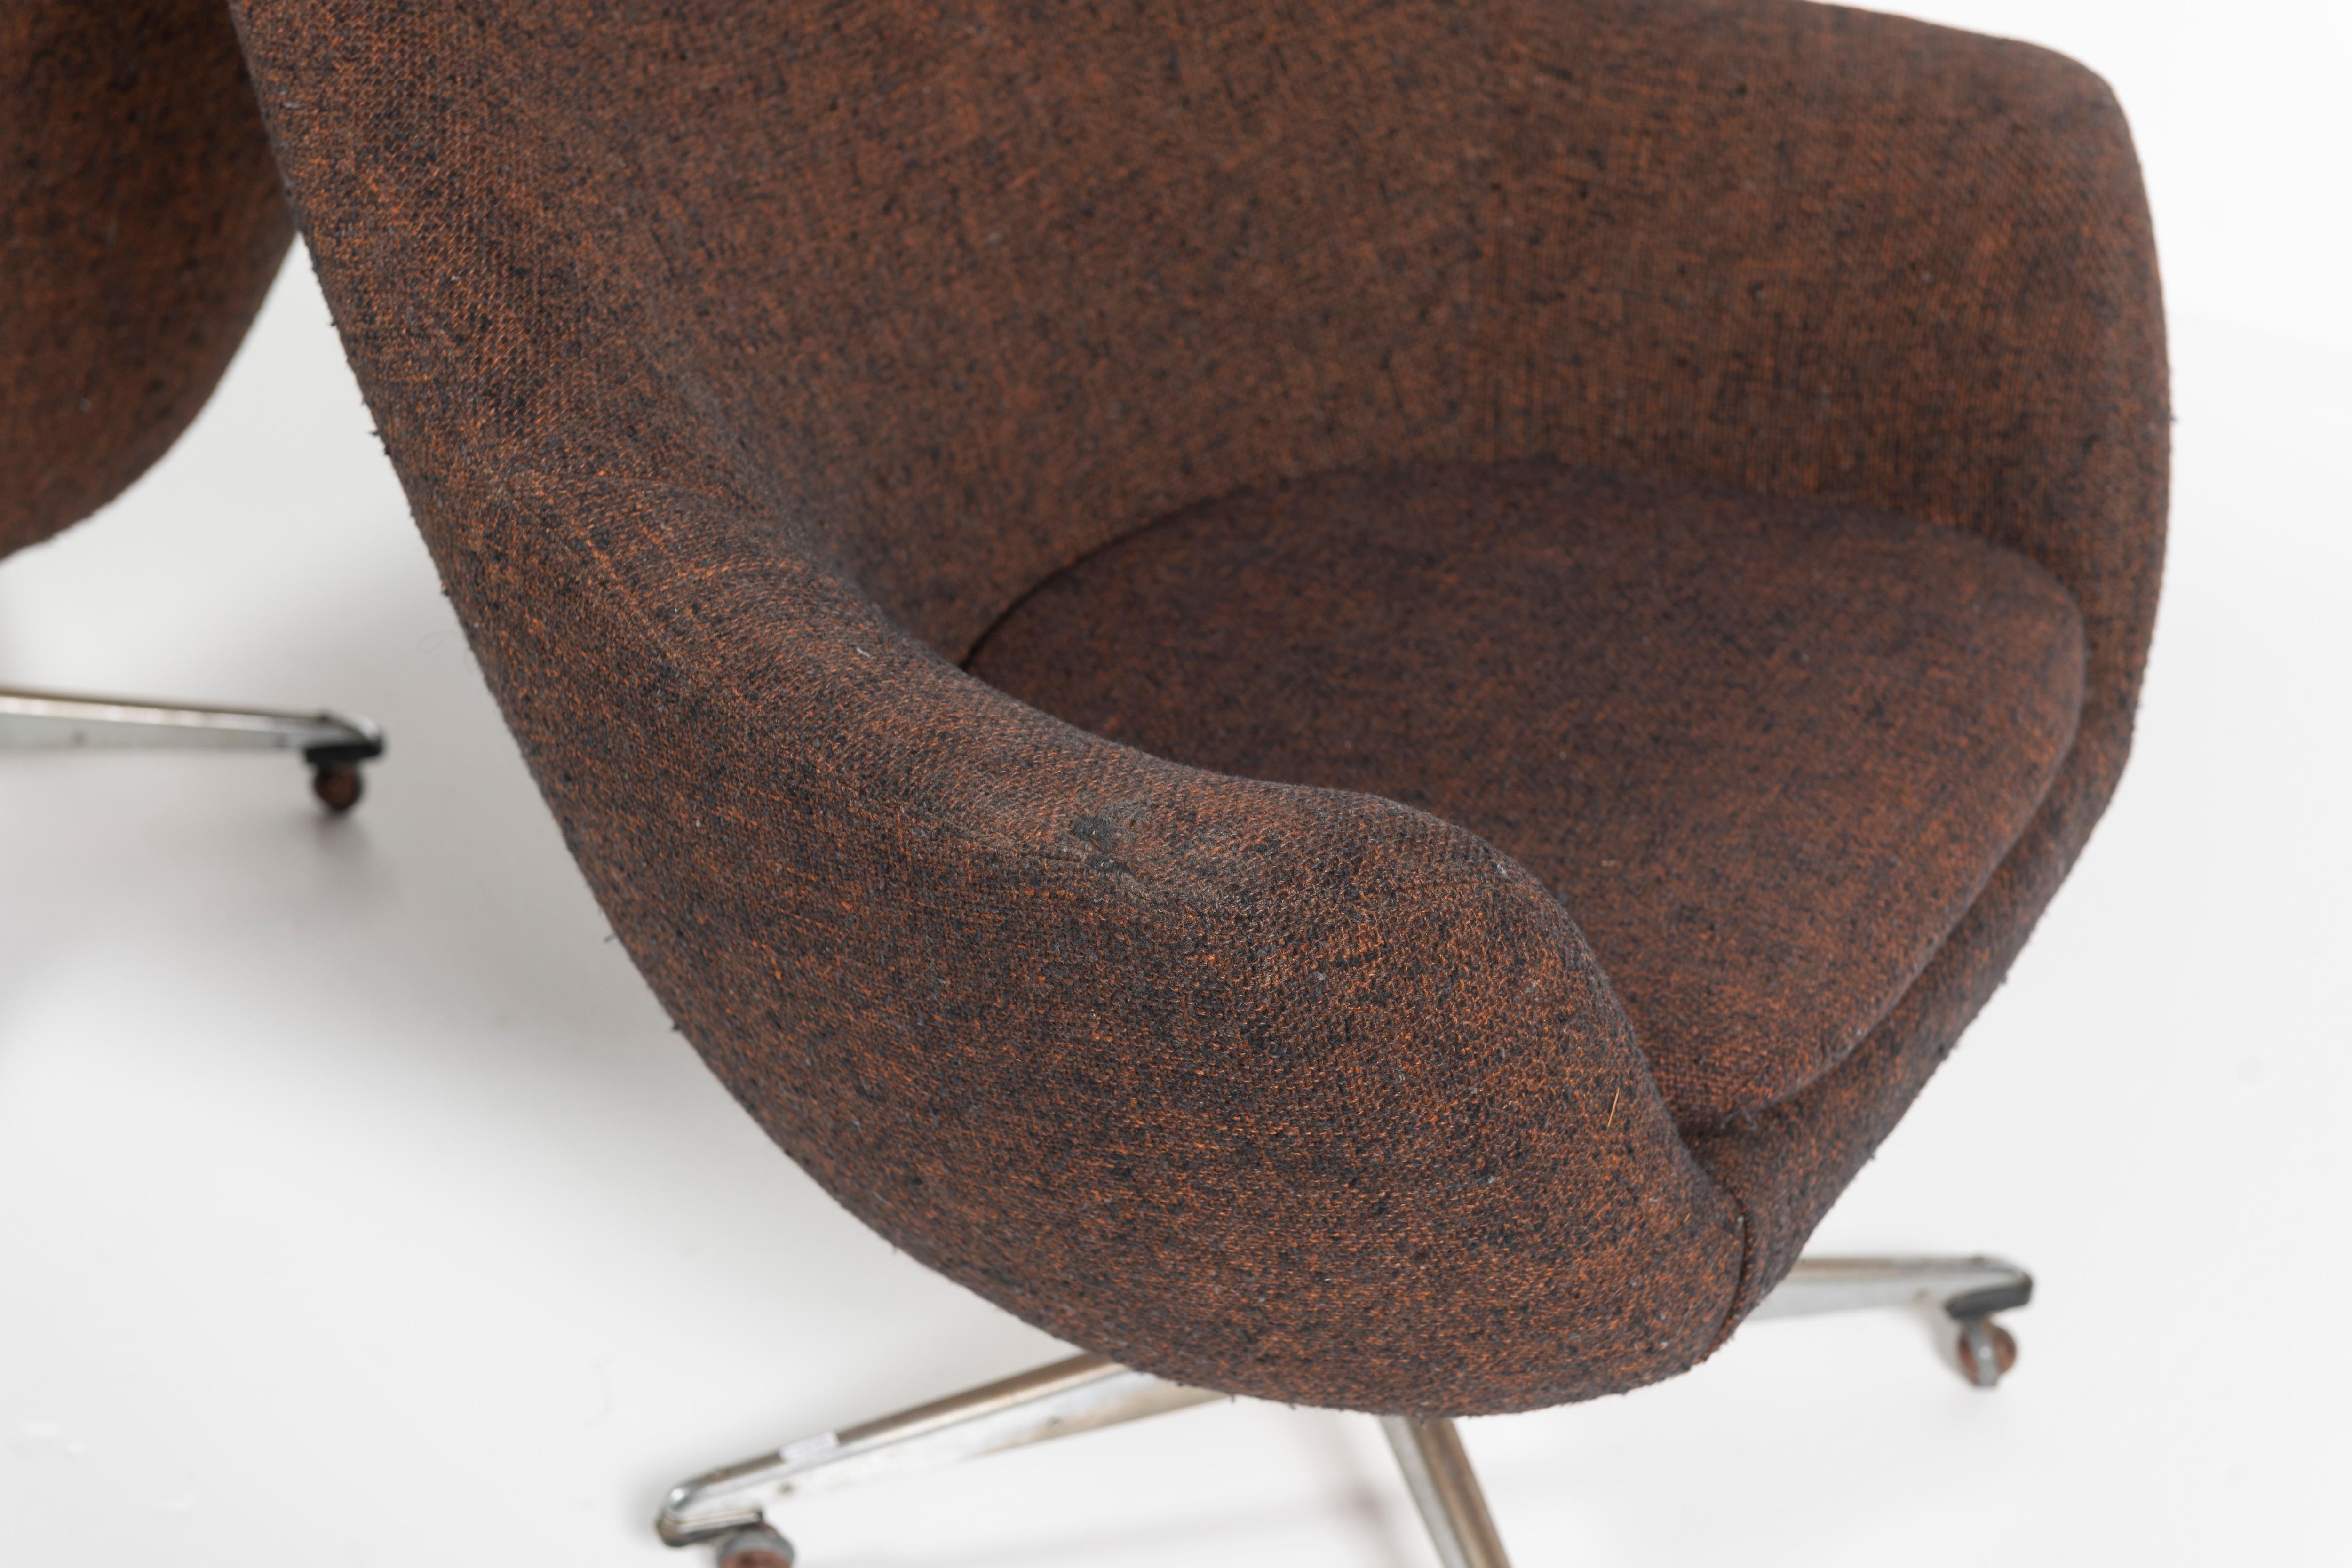 Pair of Mid-Century Modern Wool Overman Swivel Chairs, with Casters, Sweden 1960 For Sale 2